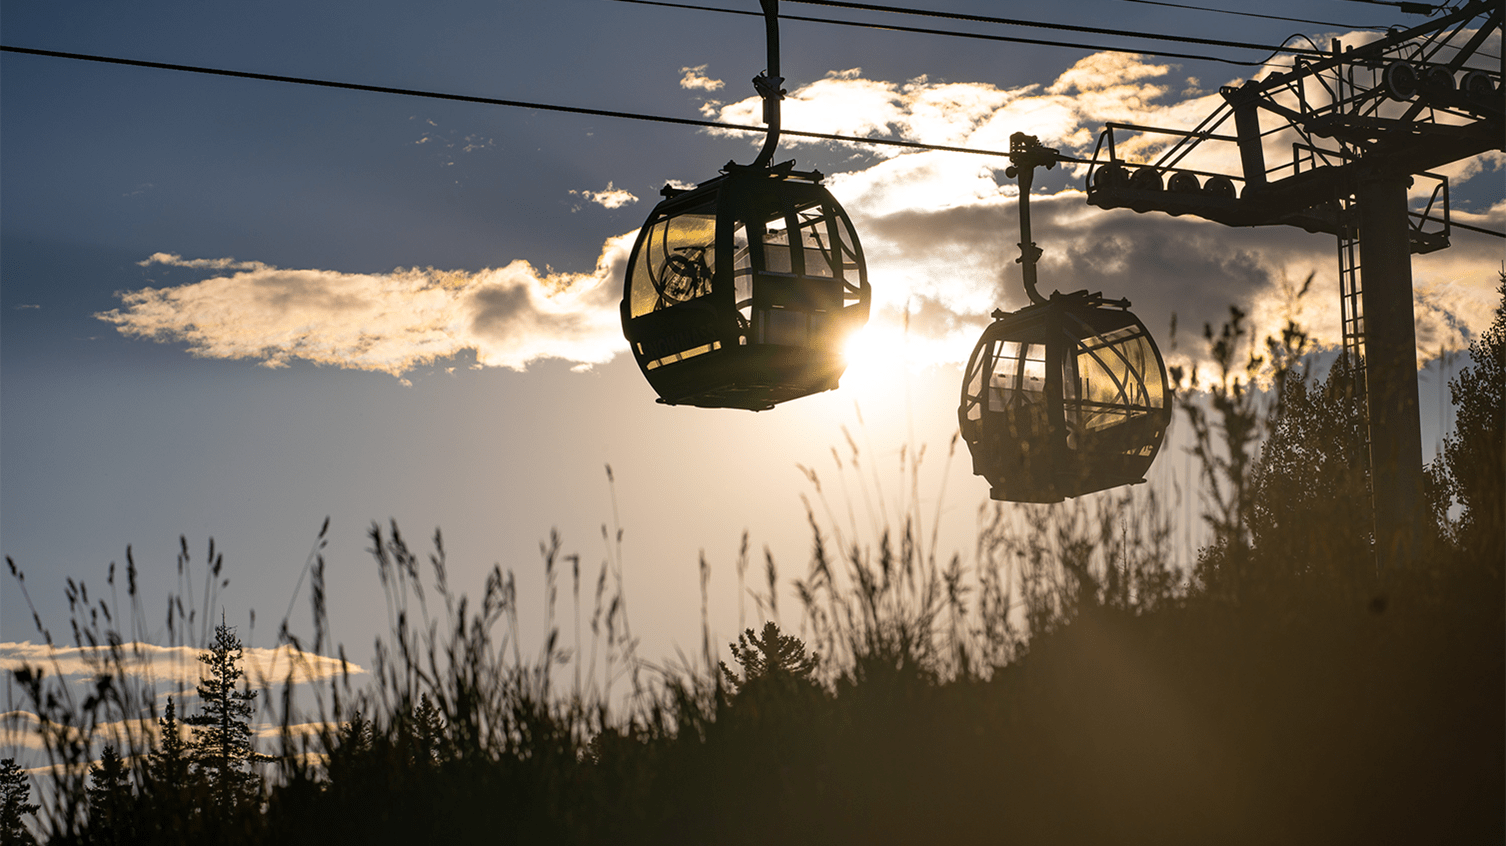 Two Gondola cars at dusk, sun is behind one car and shining through the windows and the grass in the foreground